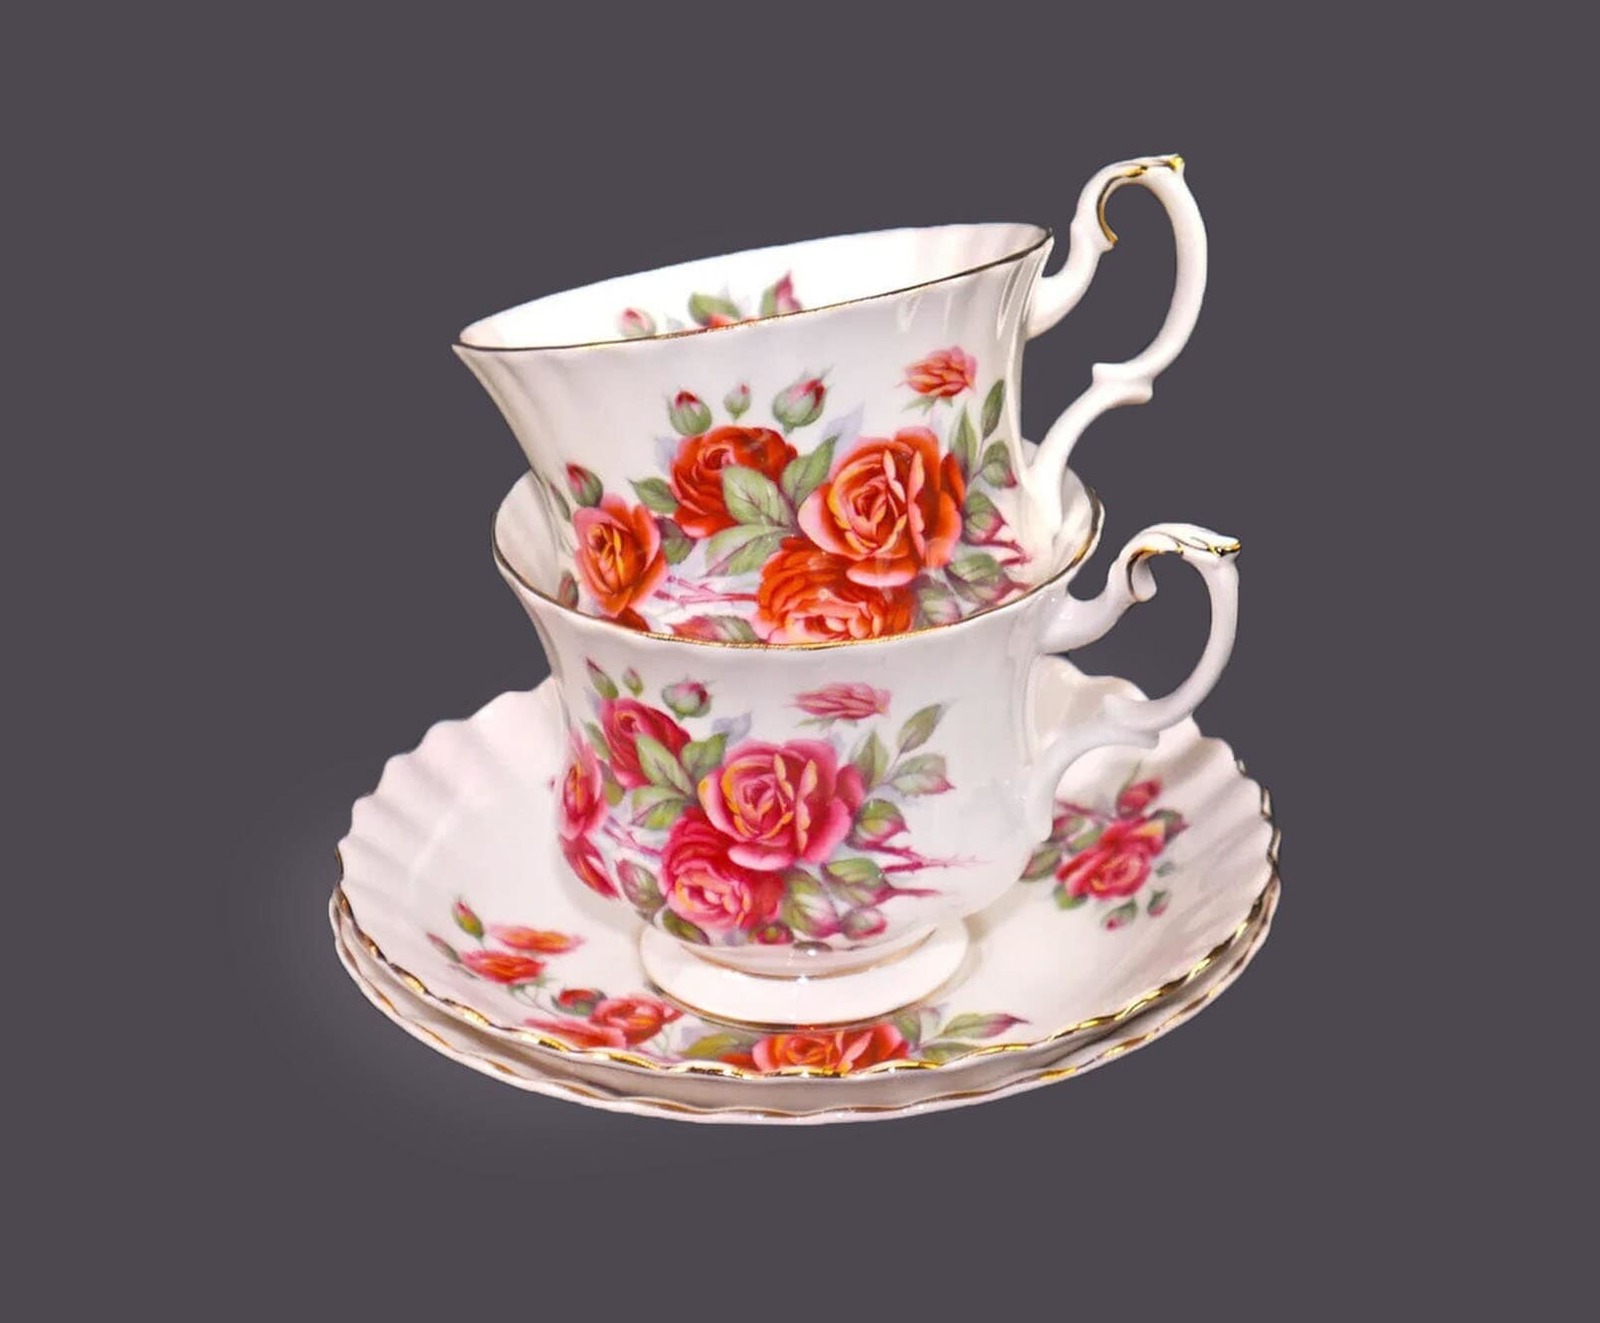 Pair of Royal Albert Centennial Rose cup and saucer sets made in England. - $66.54